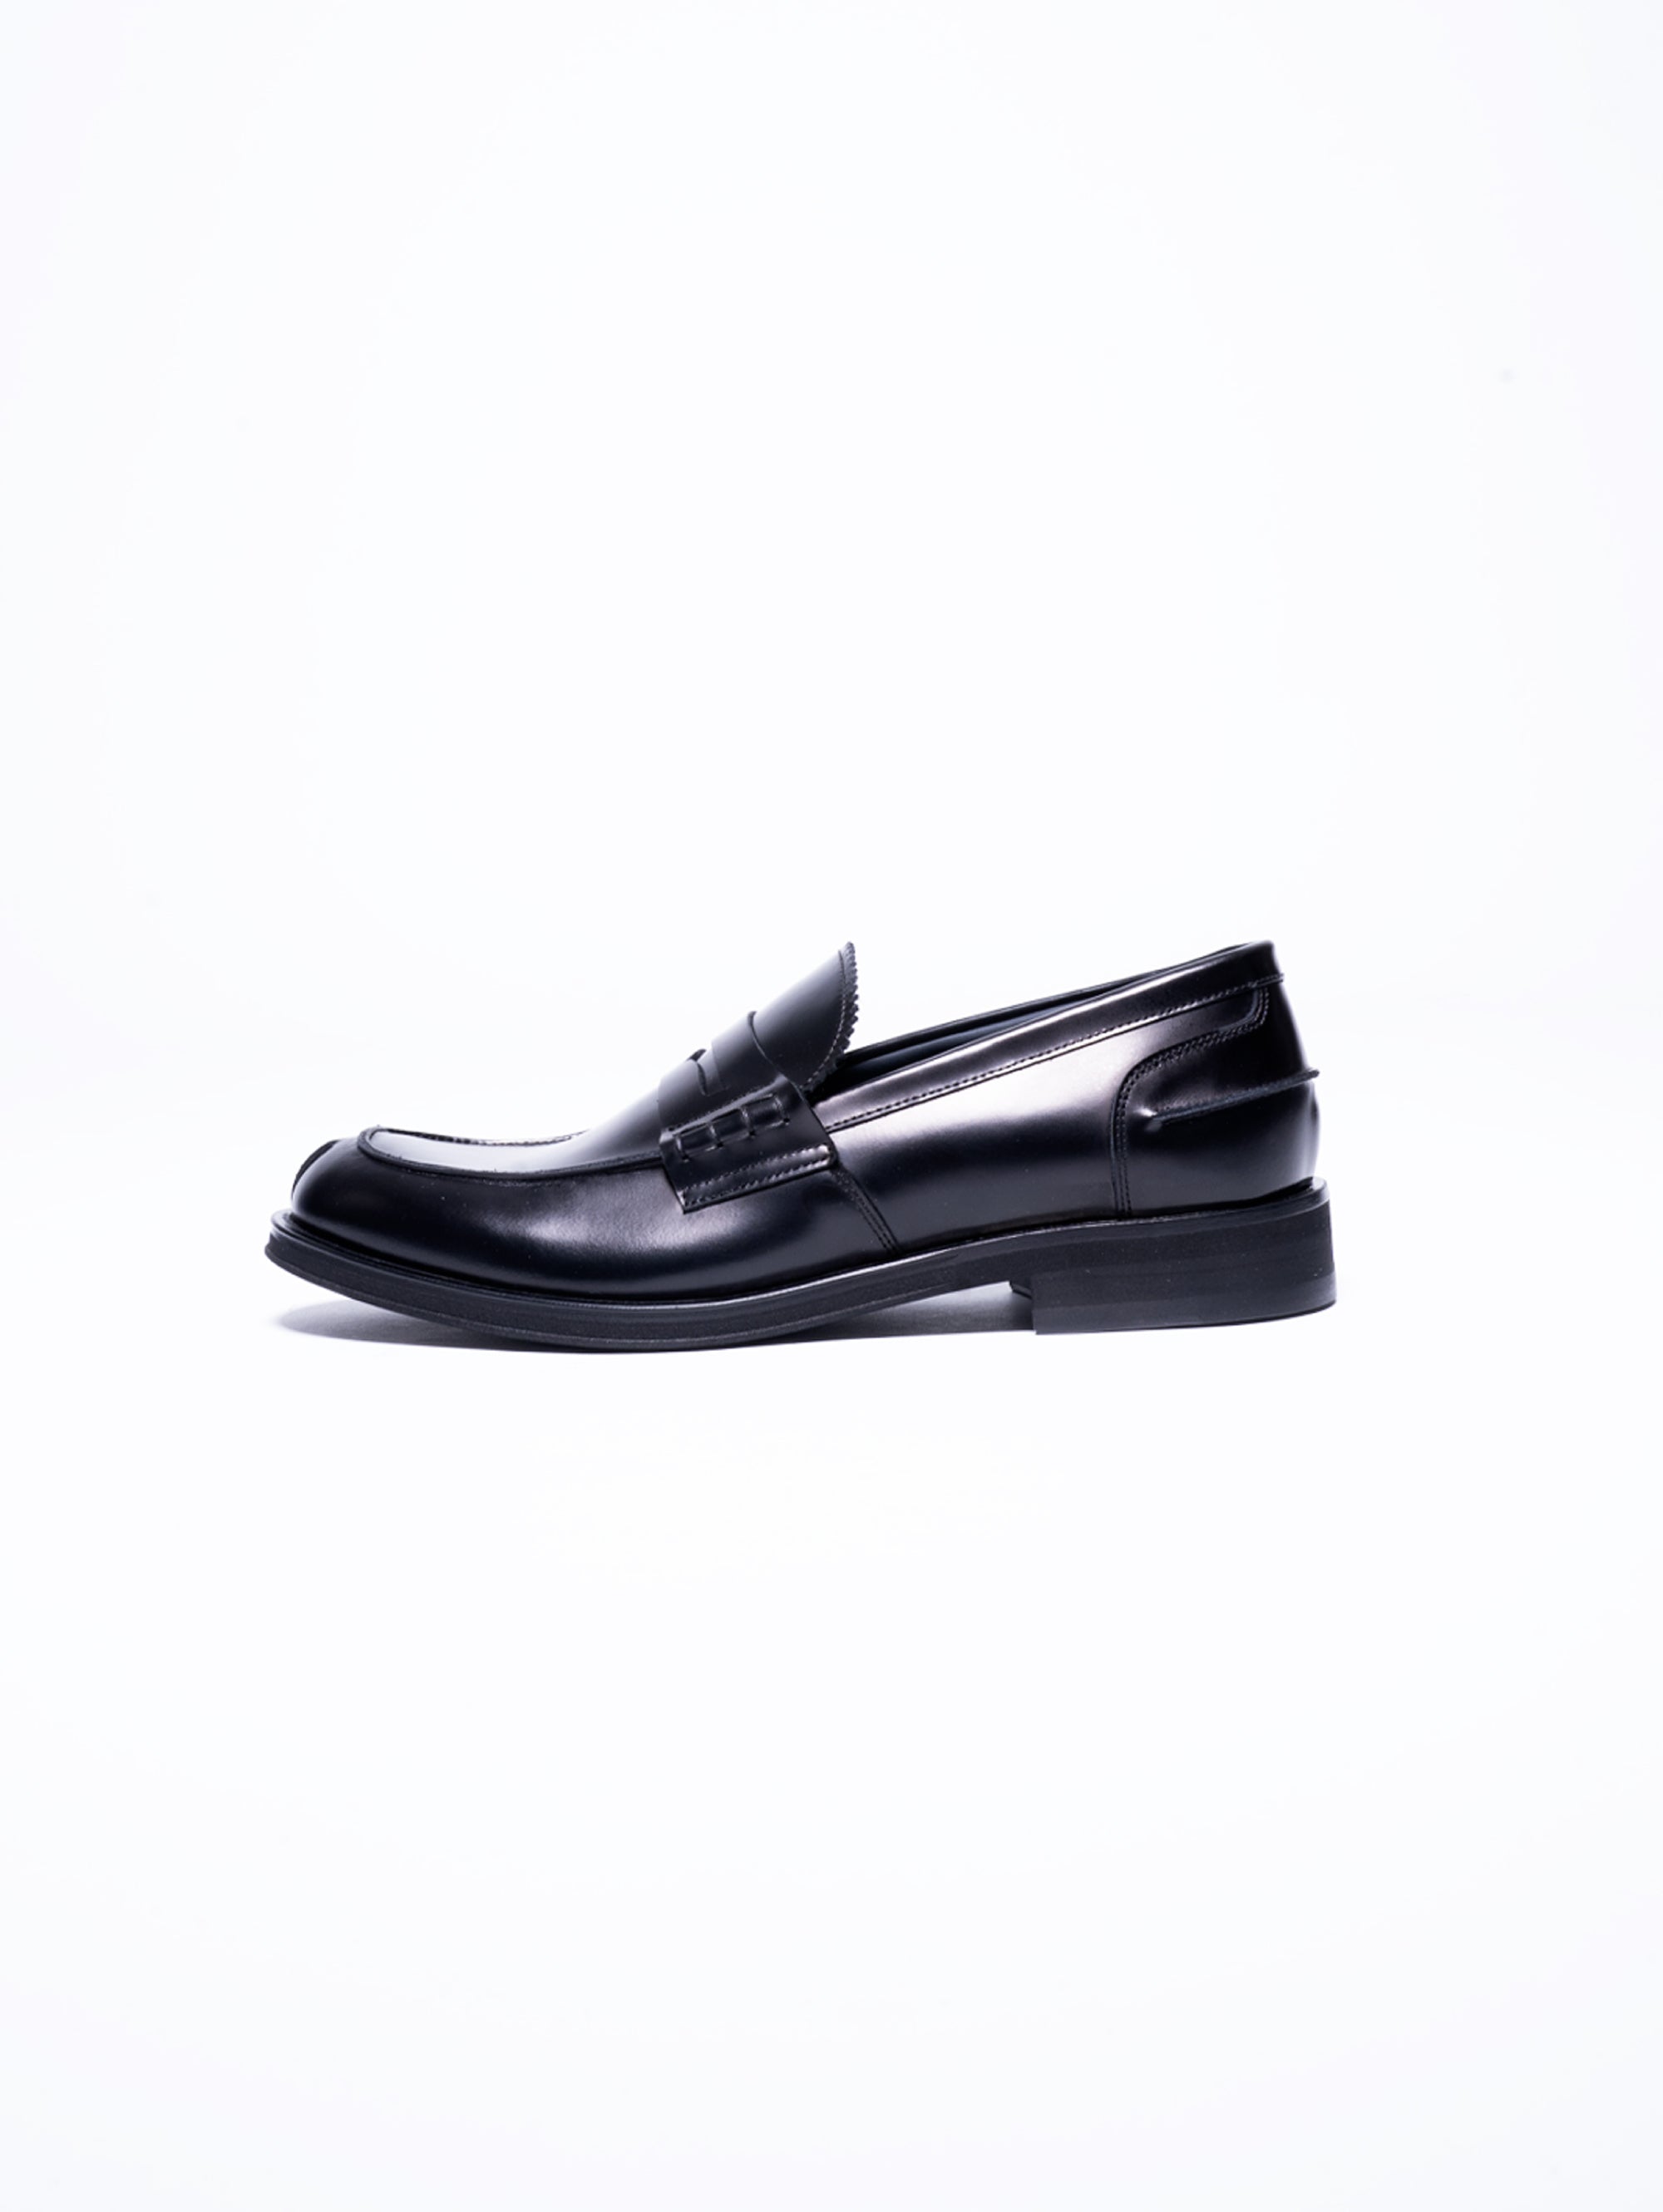 GEORGE HOL'S-Mocassino Penny Loafer in Abrasivato Nero-TRYME Shop